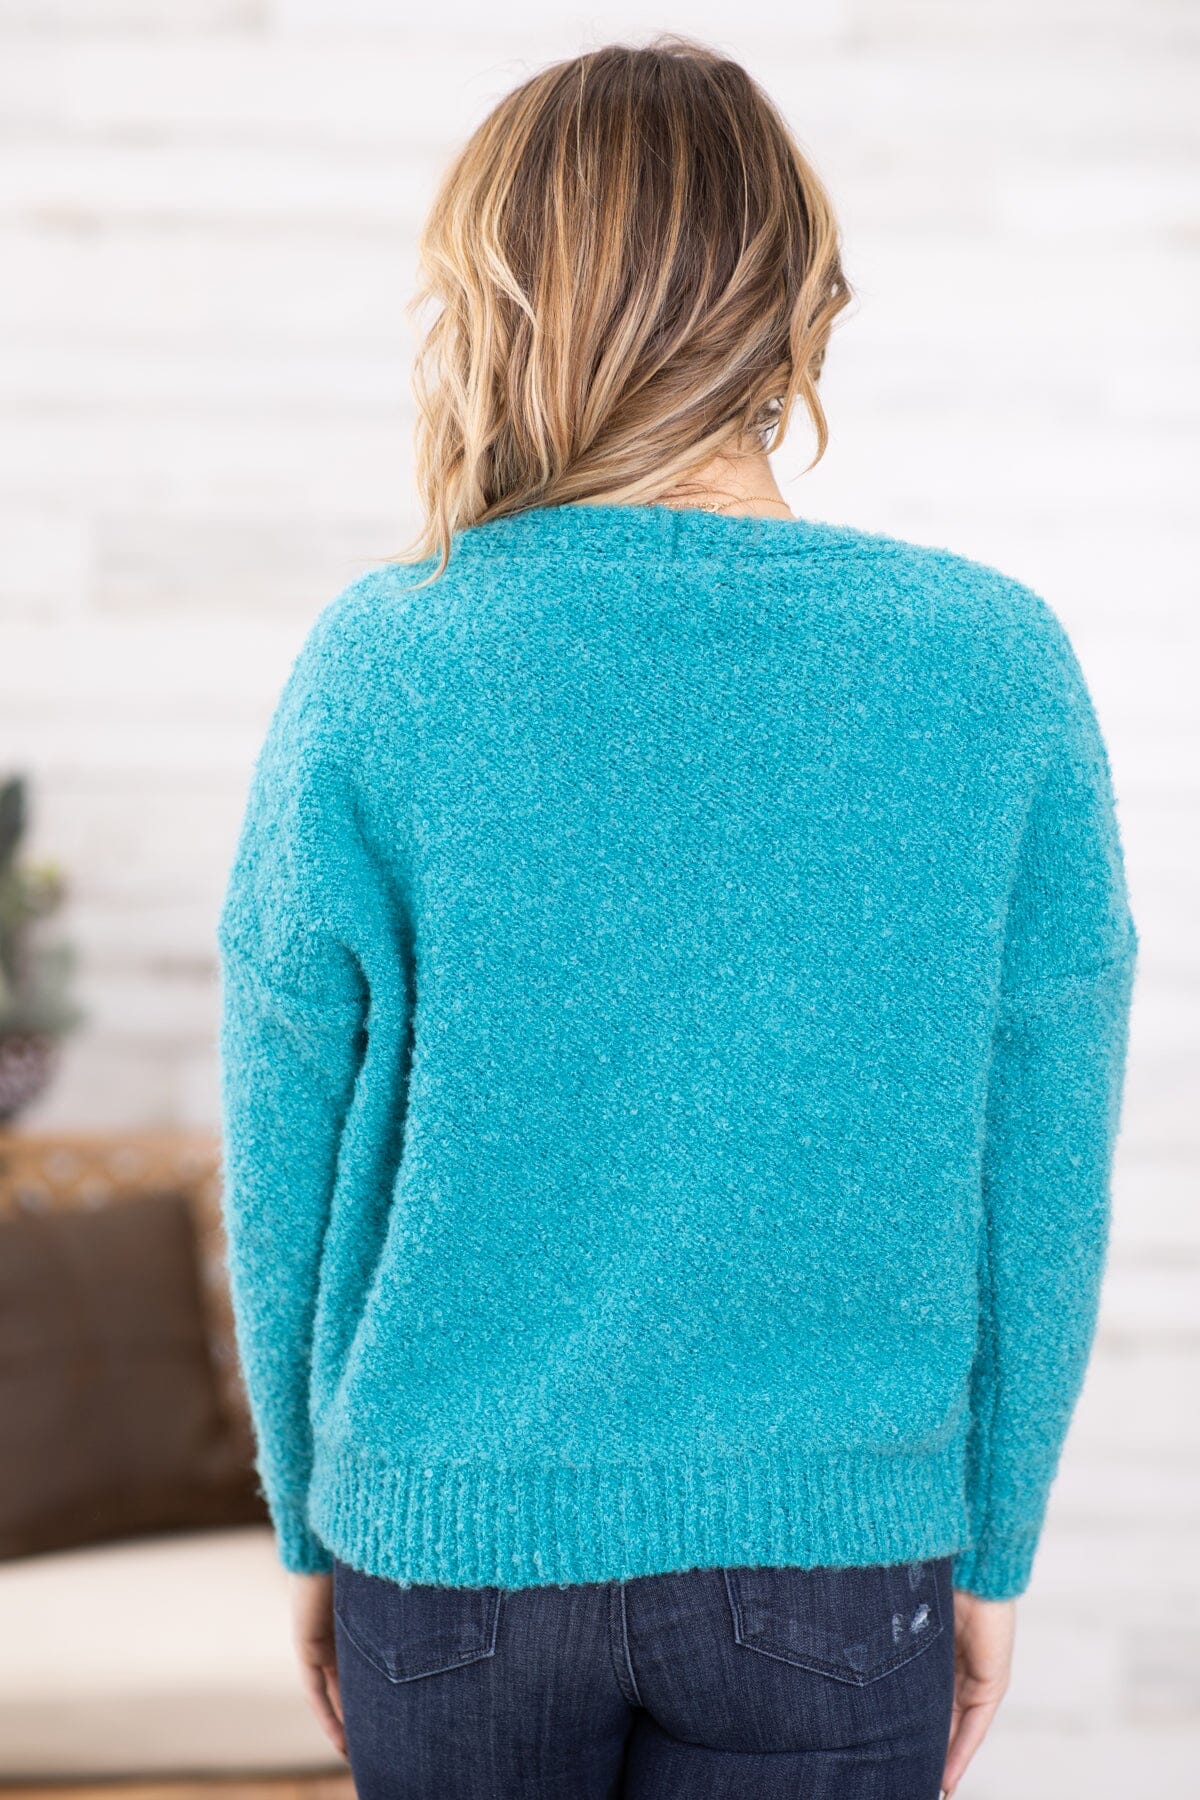 Turquoise Cardigan With Buttons - Filly Flair